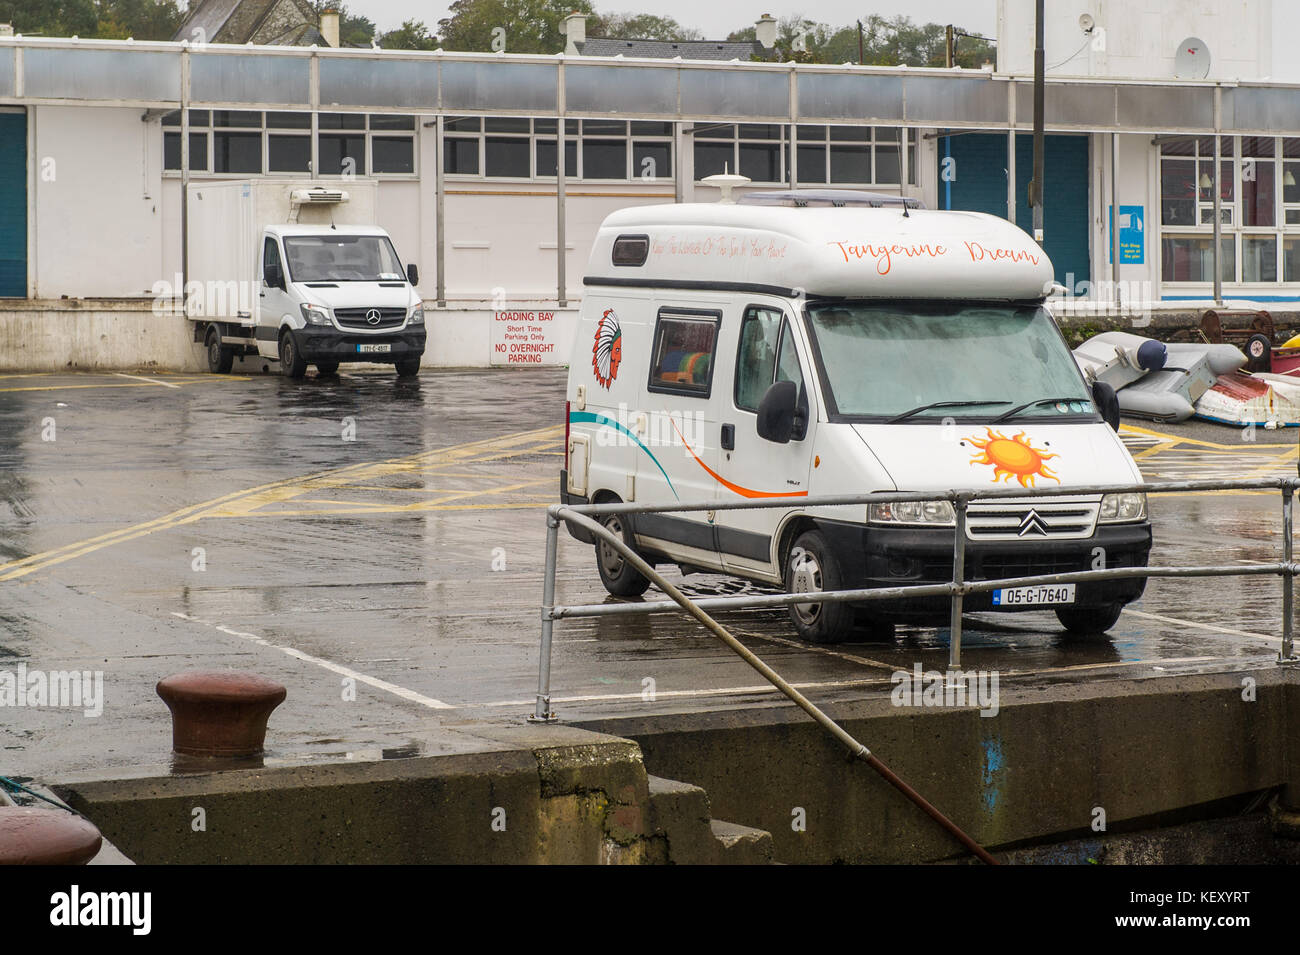 Camper van with people inside on Schull Pier, Schull, Ireland. Stock Photo